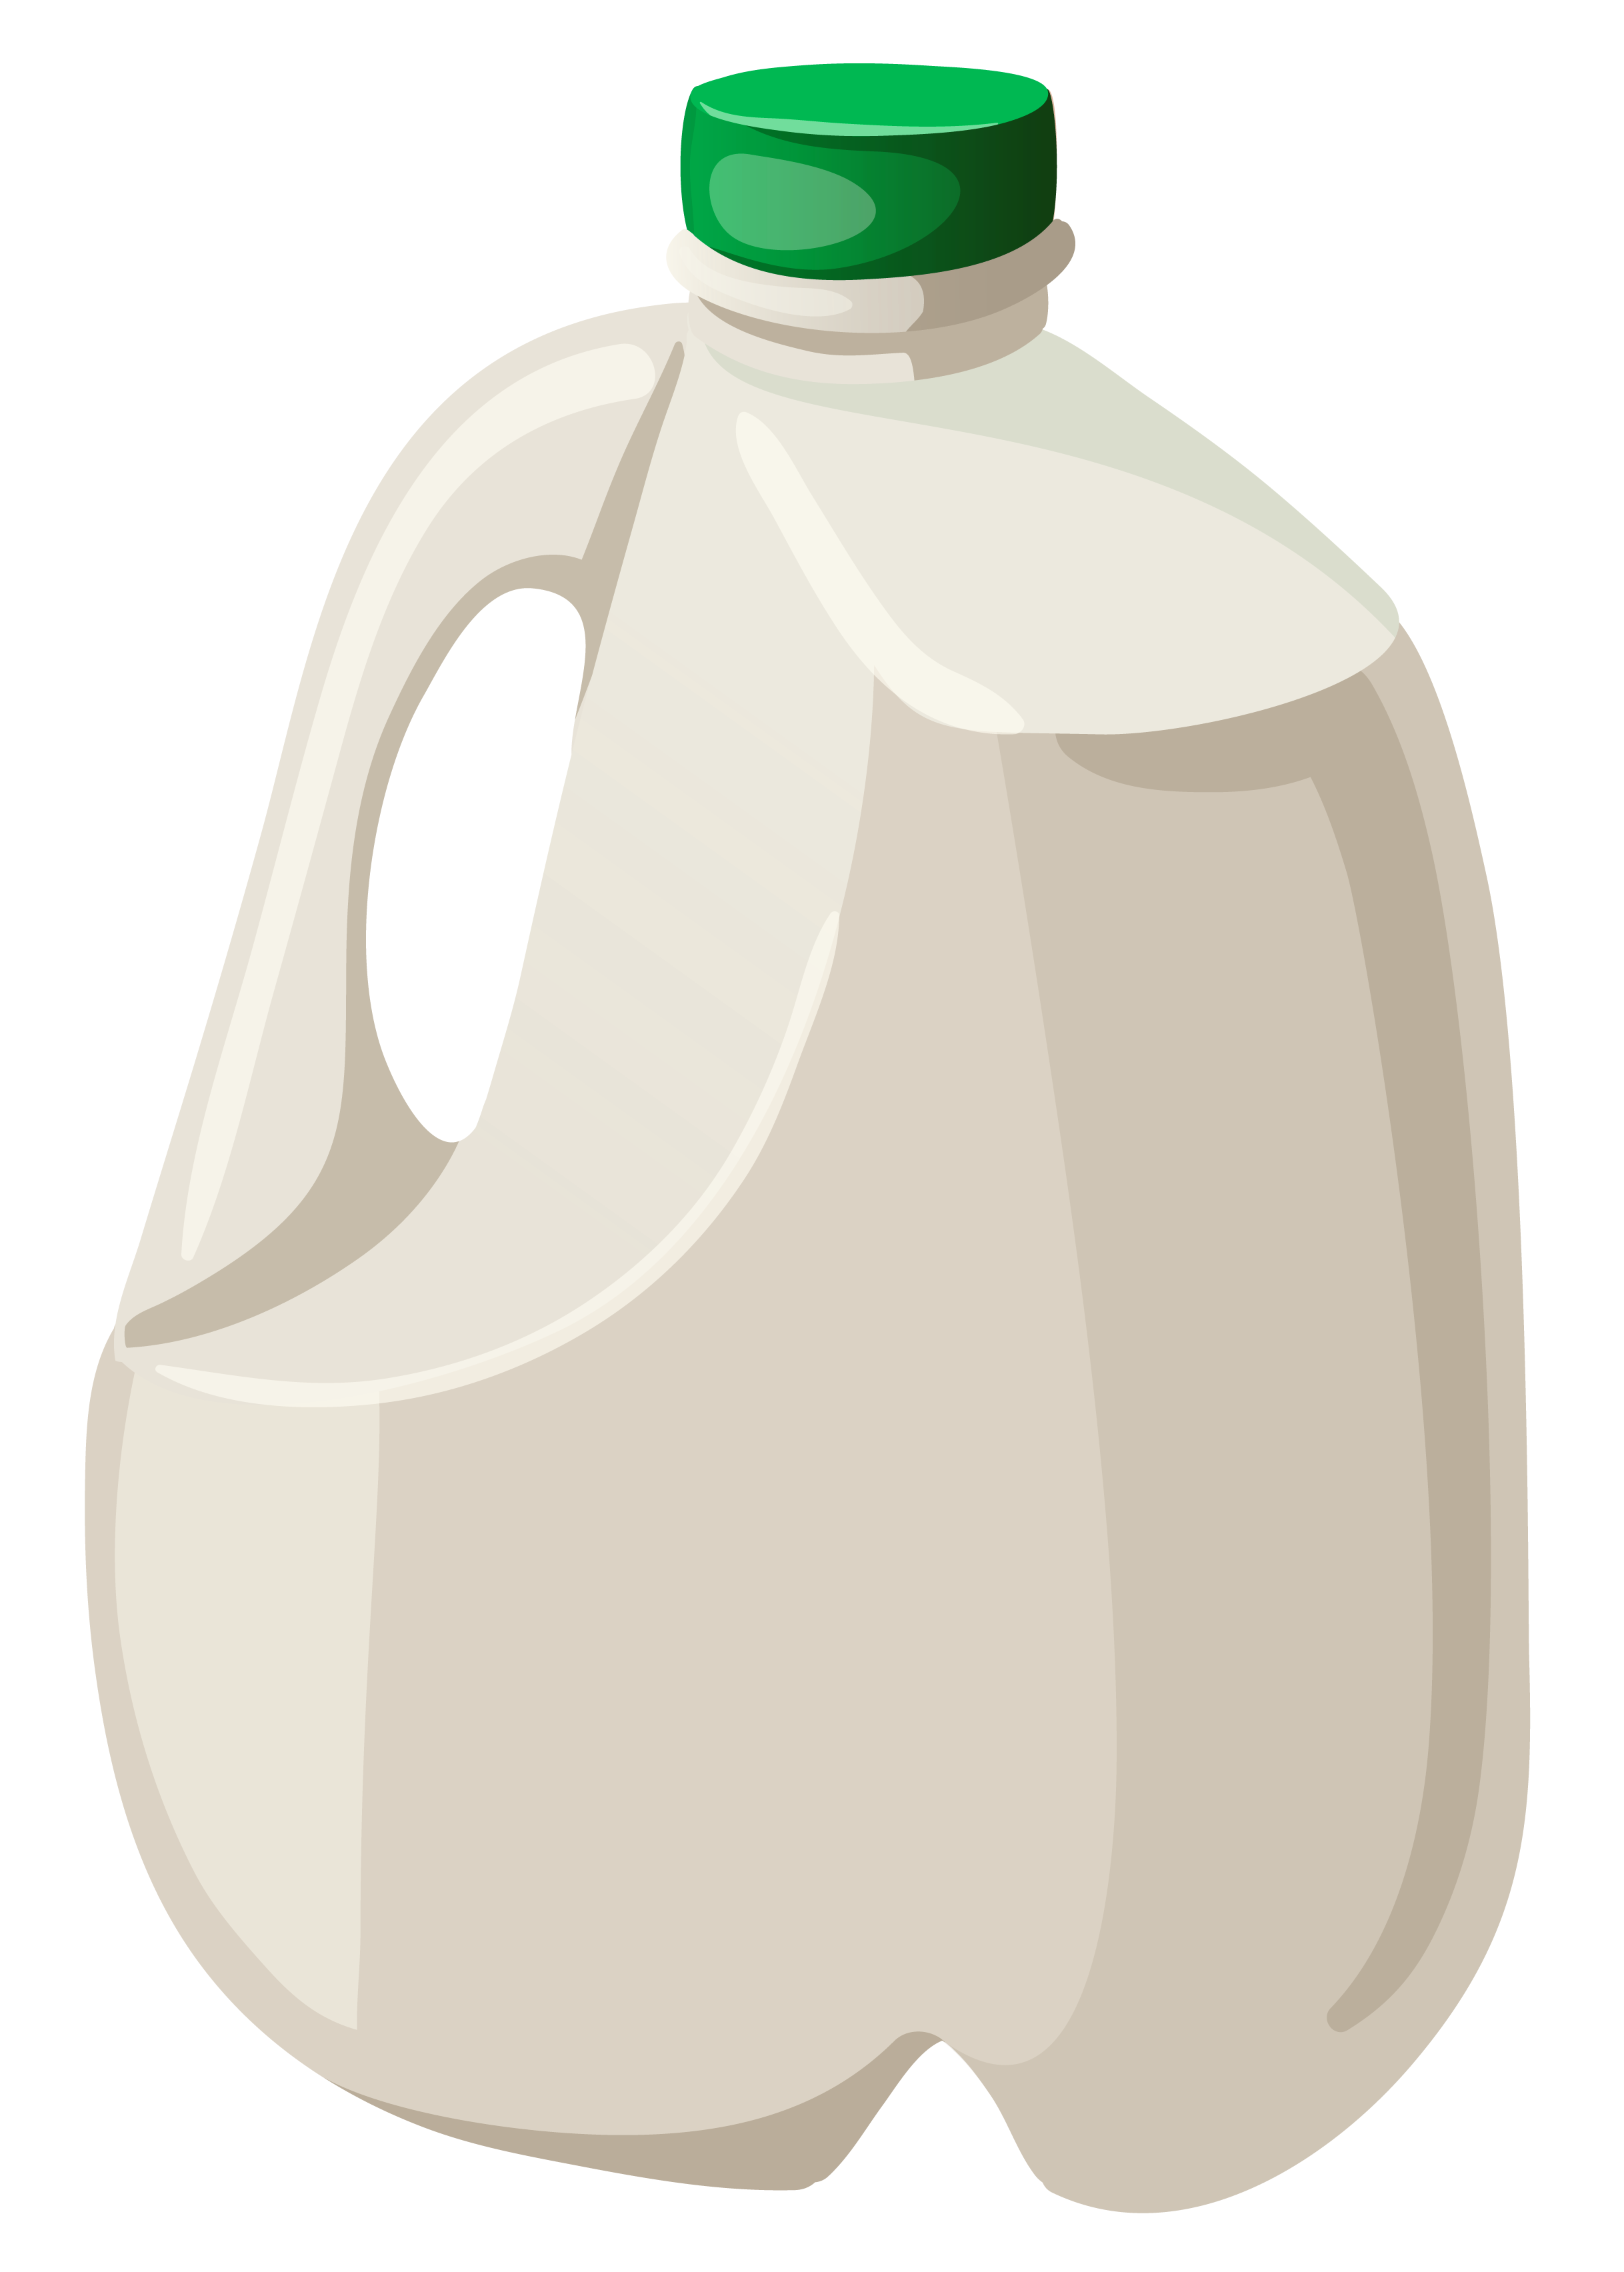 Large Bottle Of Milk Png Clipart Image Gallery Yopriceville High Quality Images And Transparent Png Free Clipart